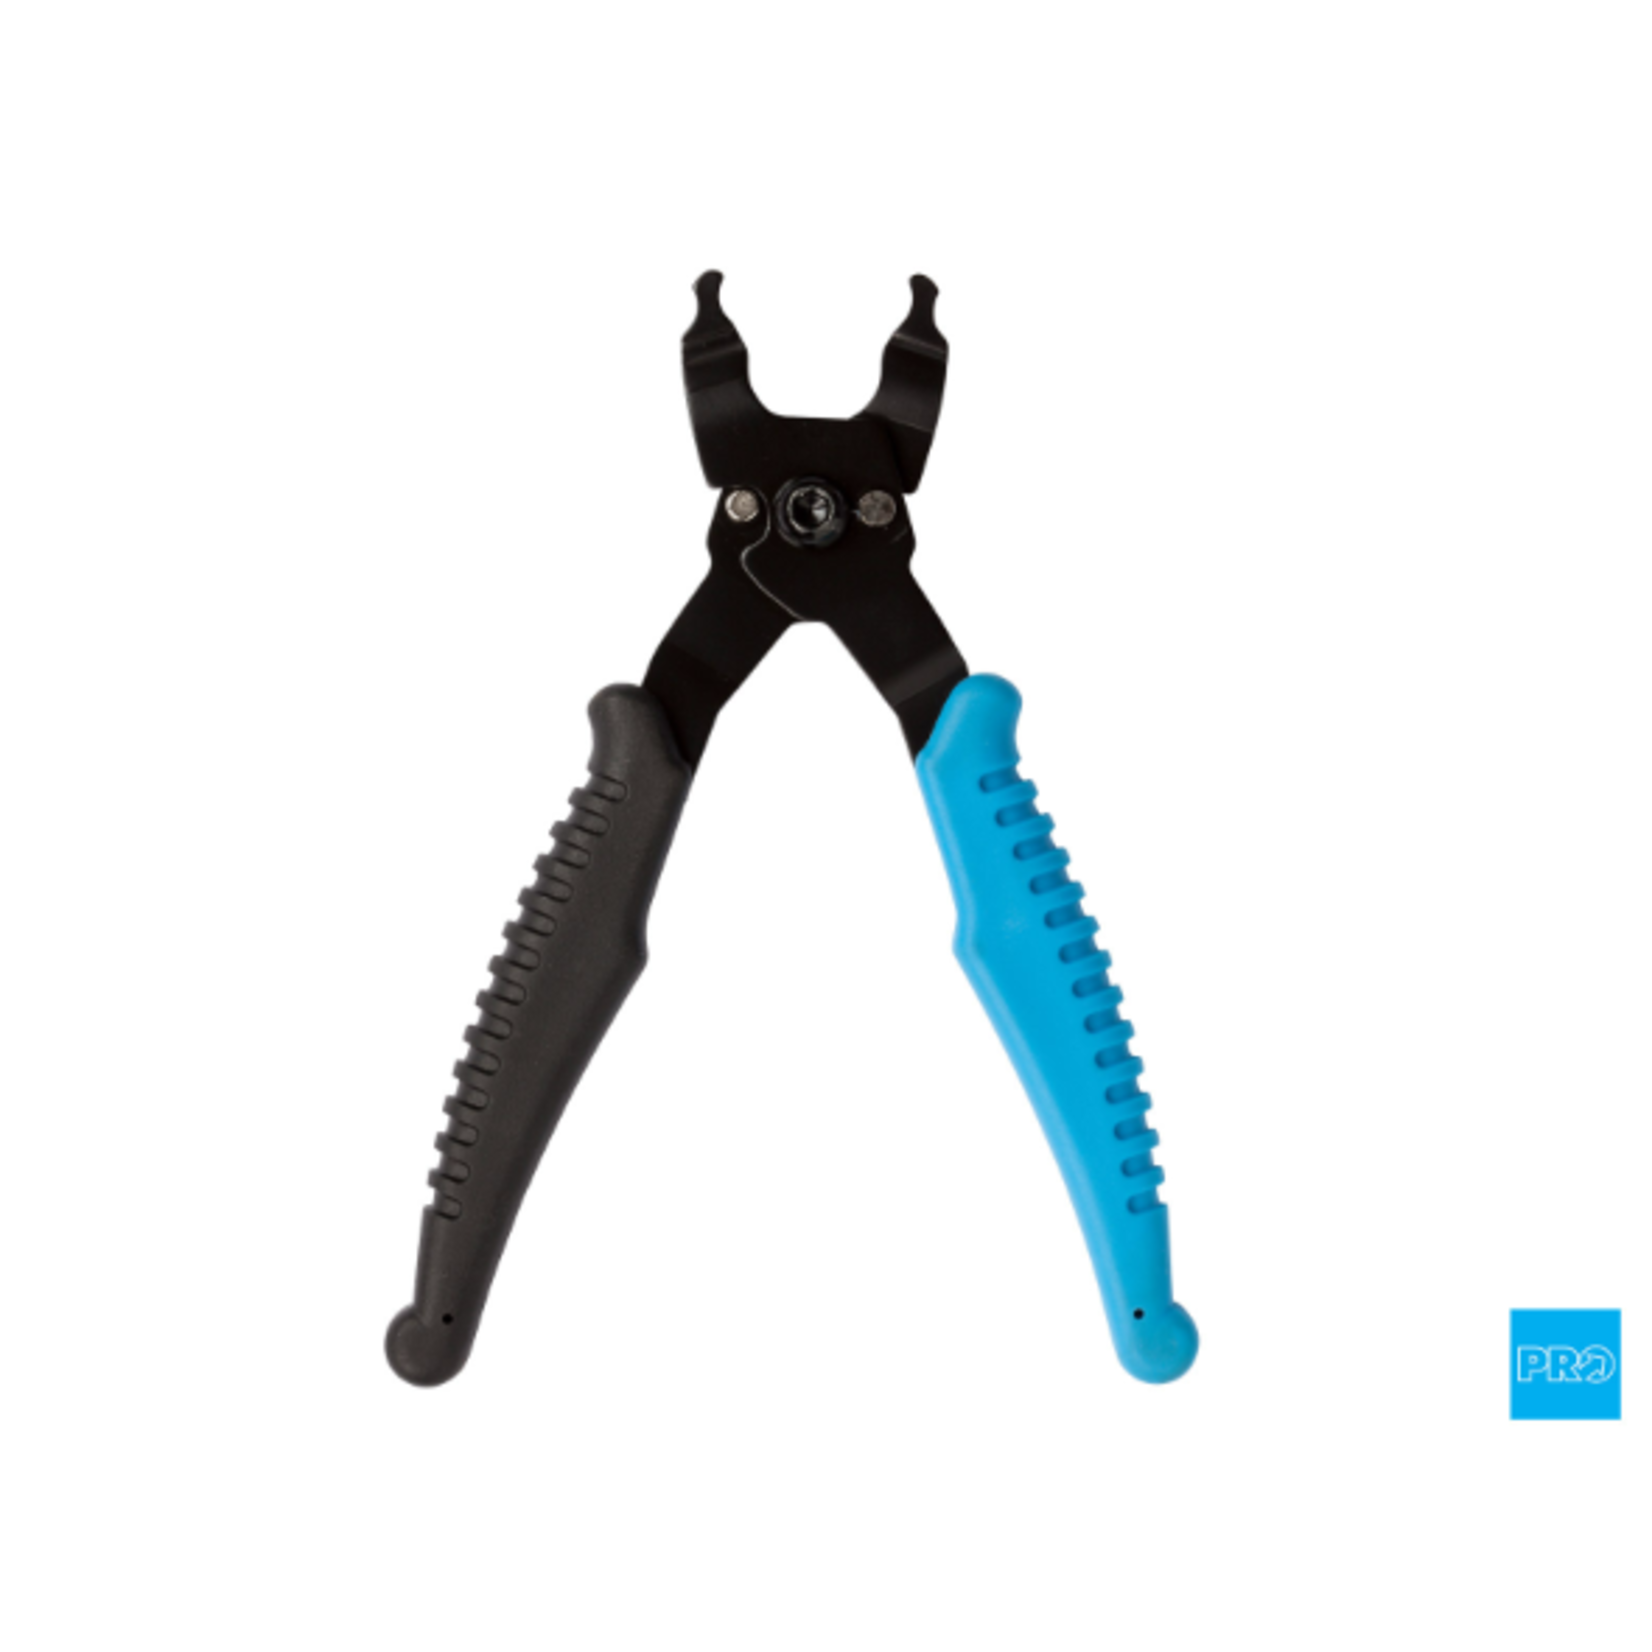 SHIMANO PRO TOOL - QUICK LINK REMOVER AND INSTALLATION